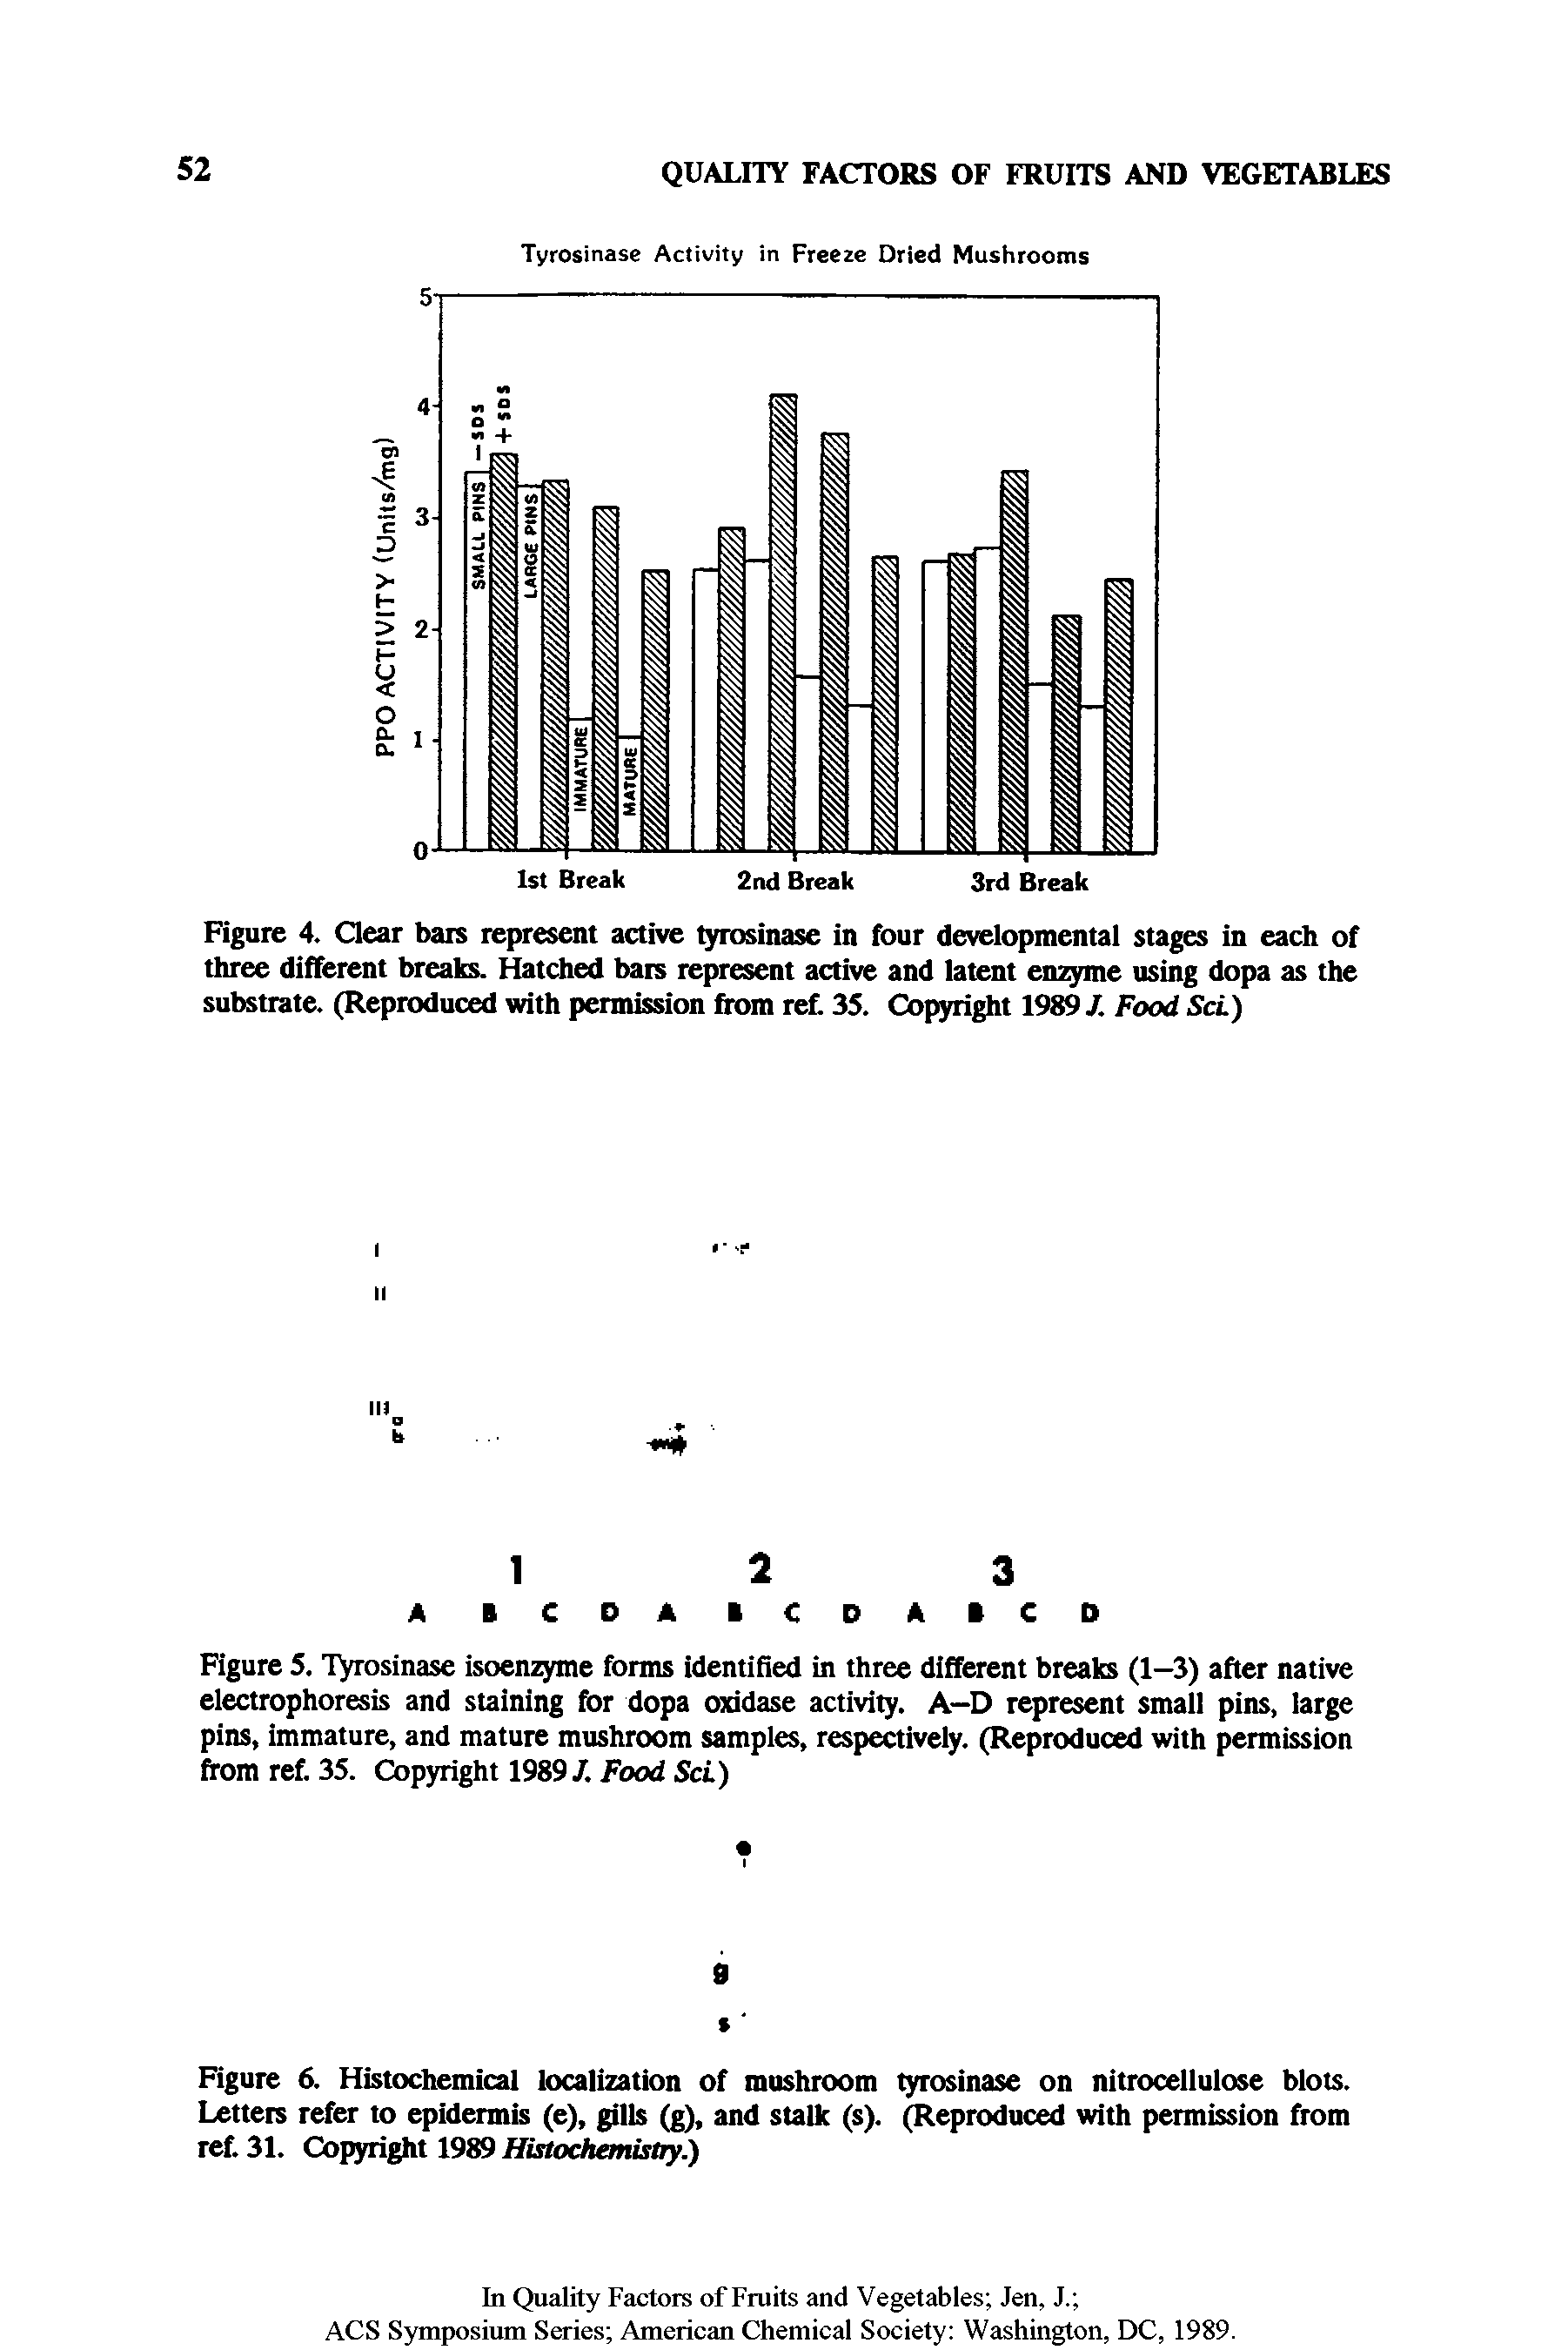 Figure 5. Tyrosinase isoenzyme forms identified in three different breaks (1—3) after native electrophoresis and staining for dopa oxidase activity. A—D represent small pins, large pins, immature, and mature mushroom samples, respectively. (Reproduced with permission from ref. 35. Copyright 1989/. Food ScL)...